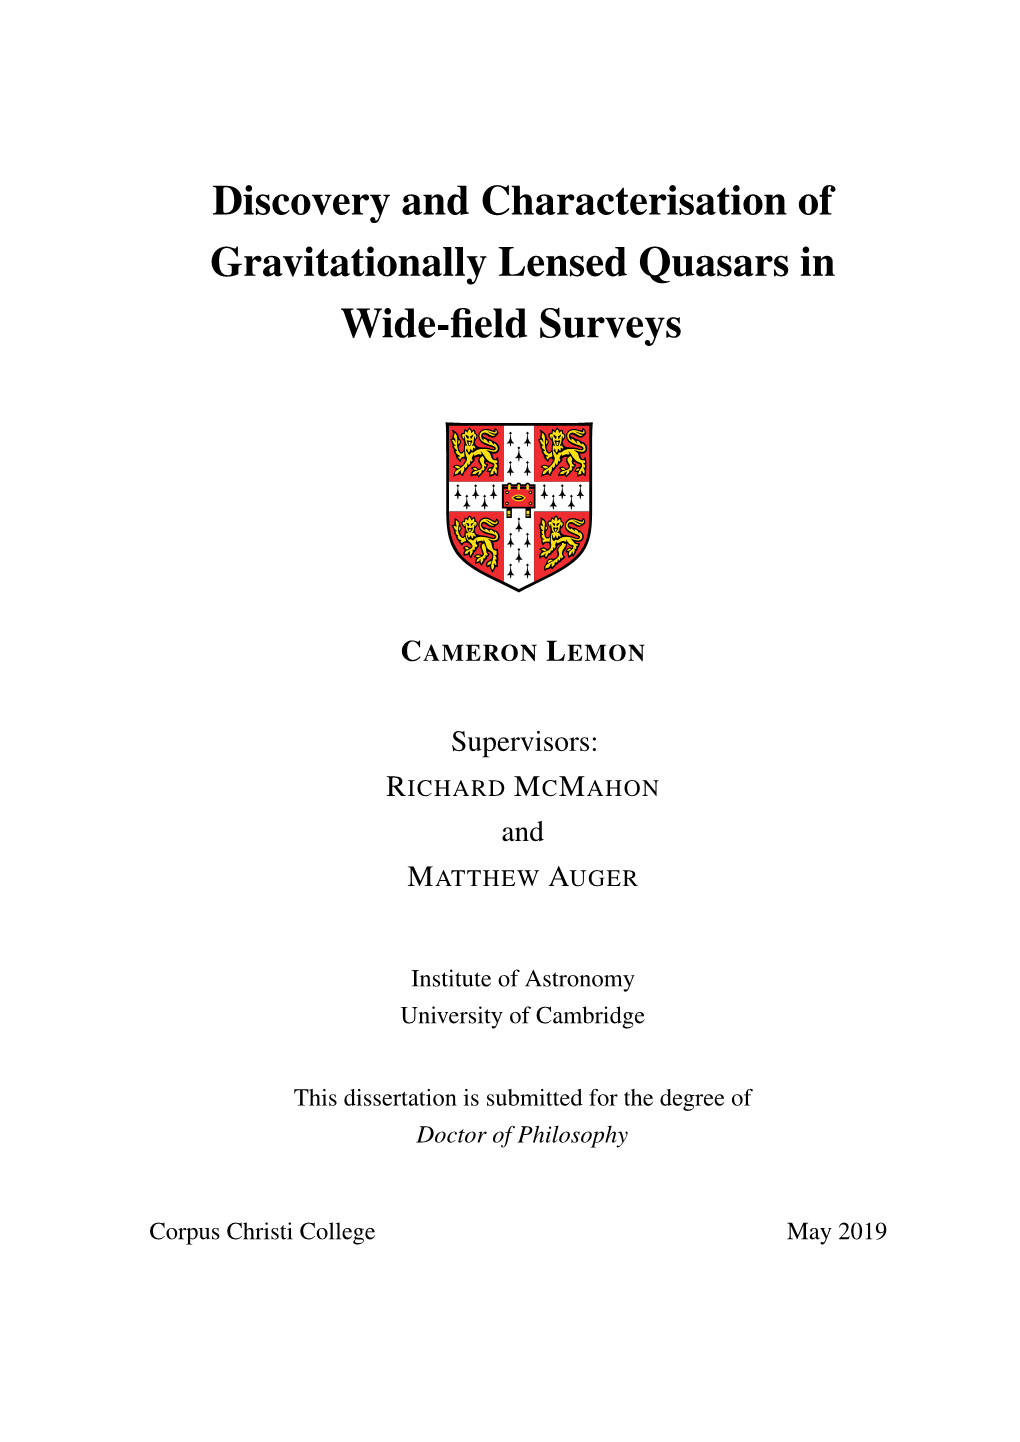 Discovery and Characterisation of Gravitationally Lensed Quasars in Wide-Field Surveys